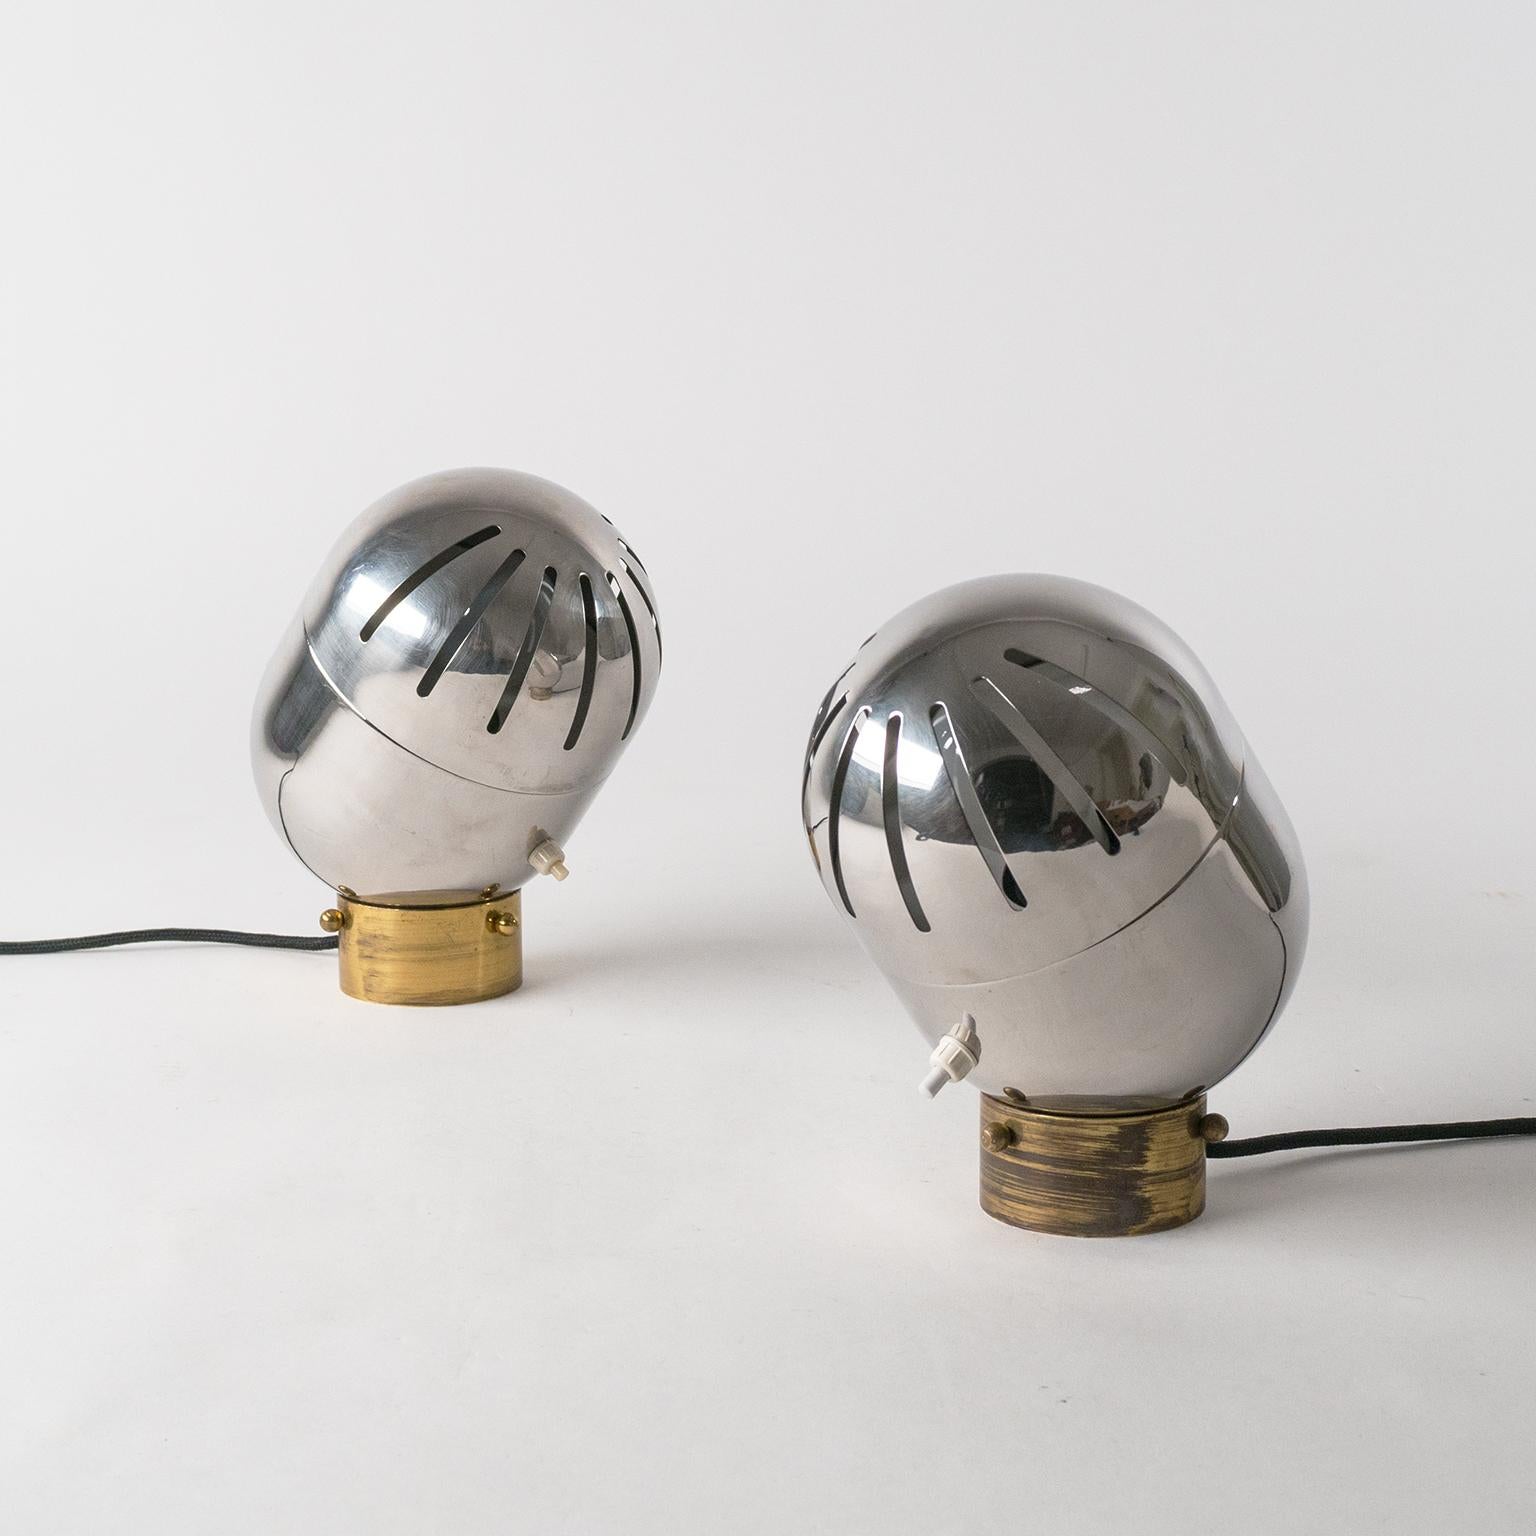 Rare pair of Italian chrome table lamps by Reggiani, 1960s. Very sculptural design with an all-chrome body with discreet slits on the upper cover (which can be rotated 360 degrees) which allow the light to seep through for a subtle effect. Each